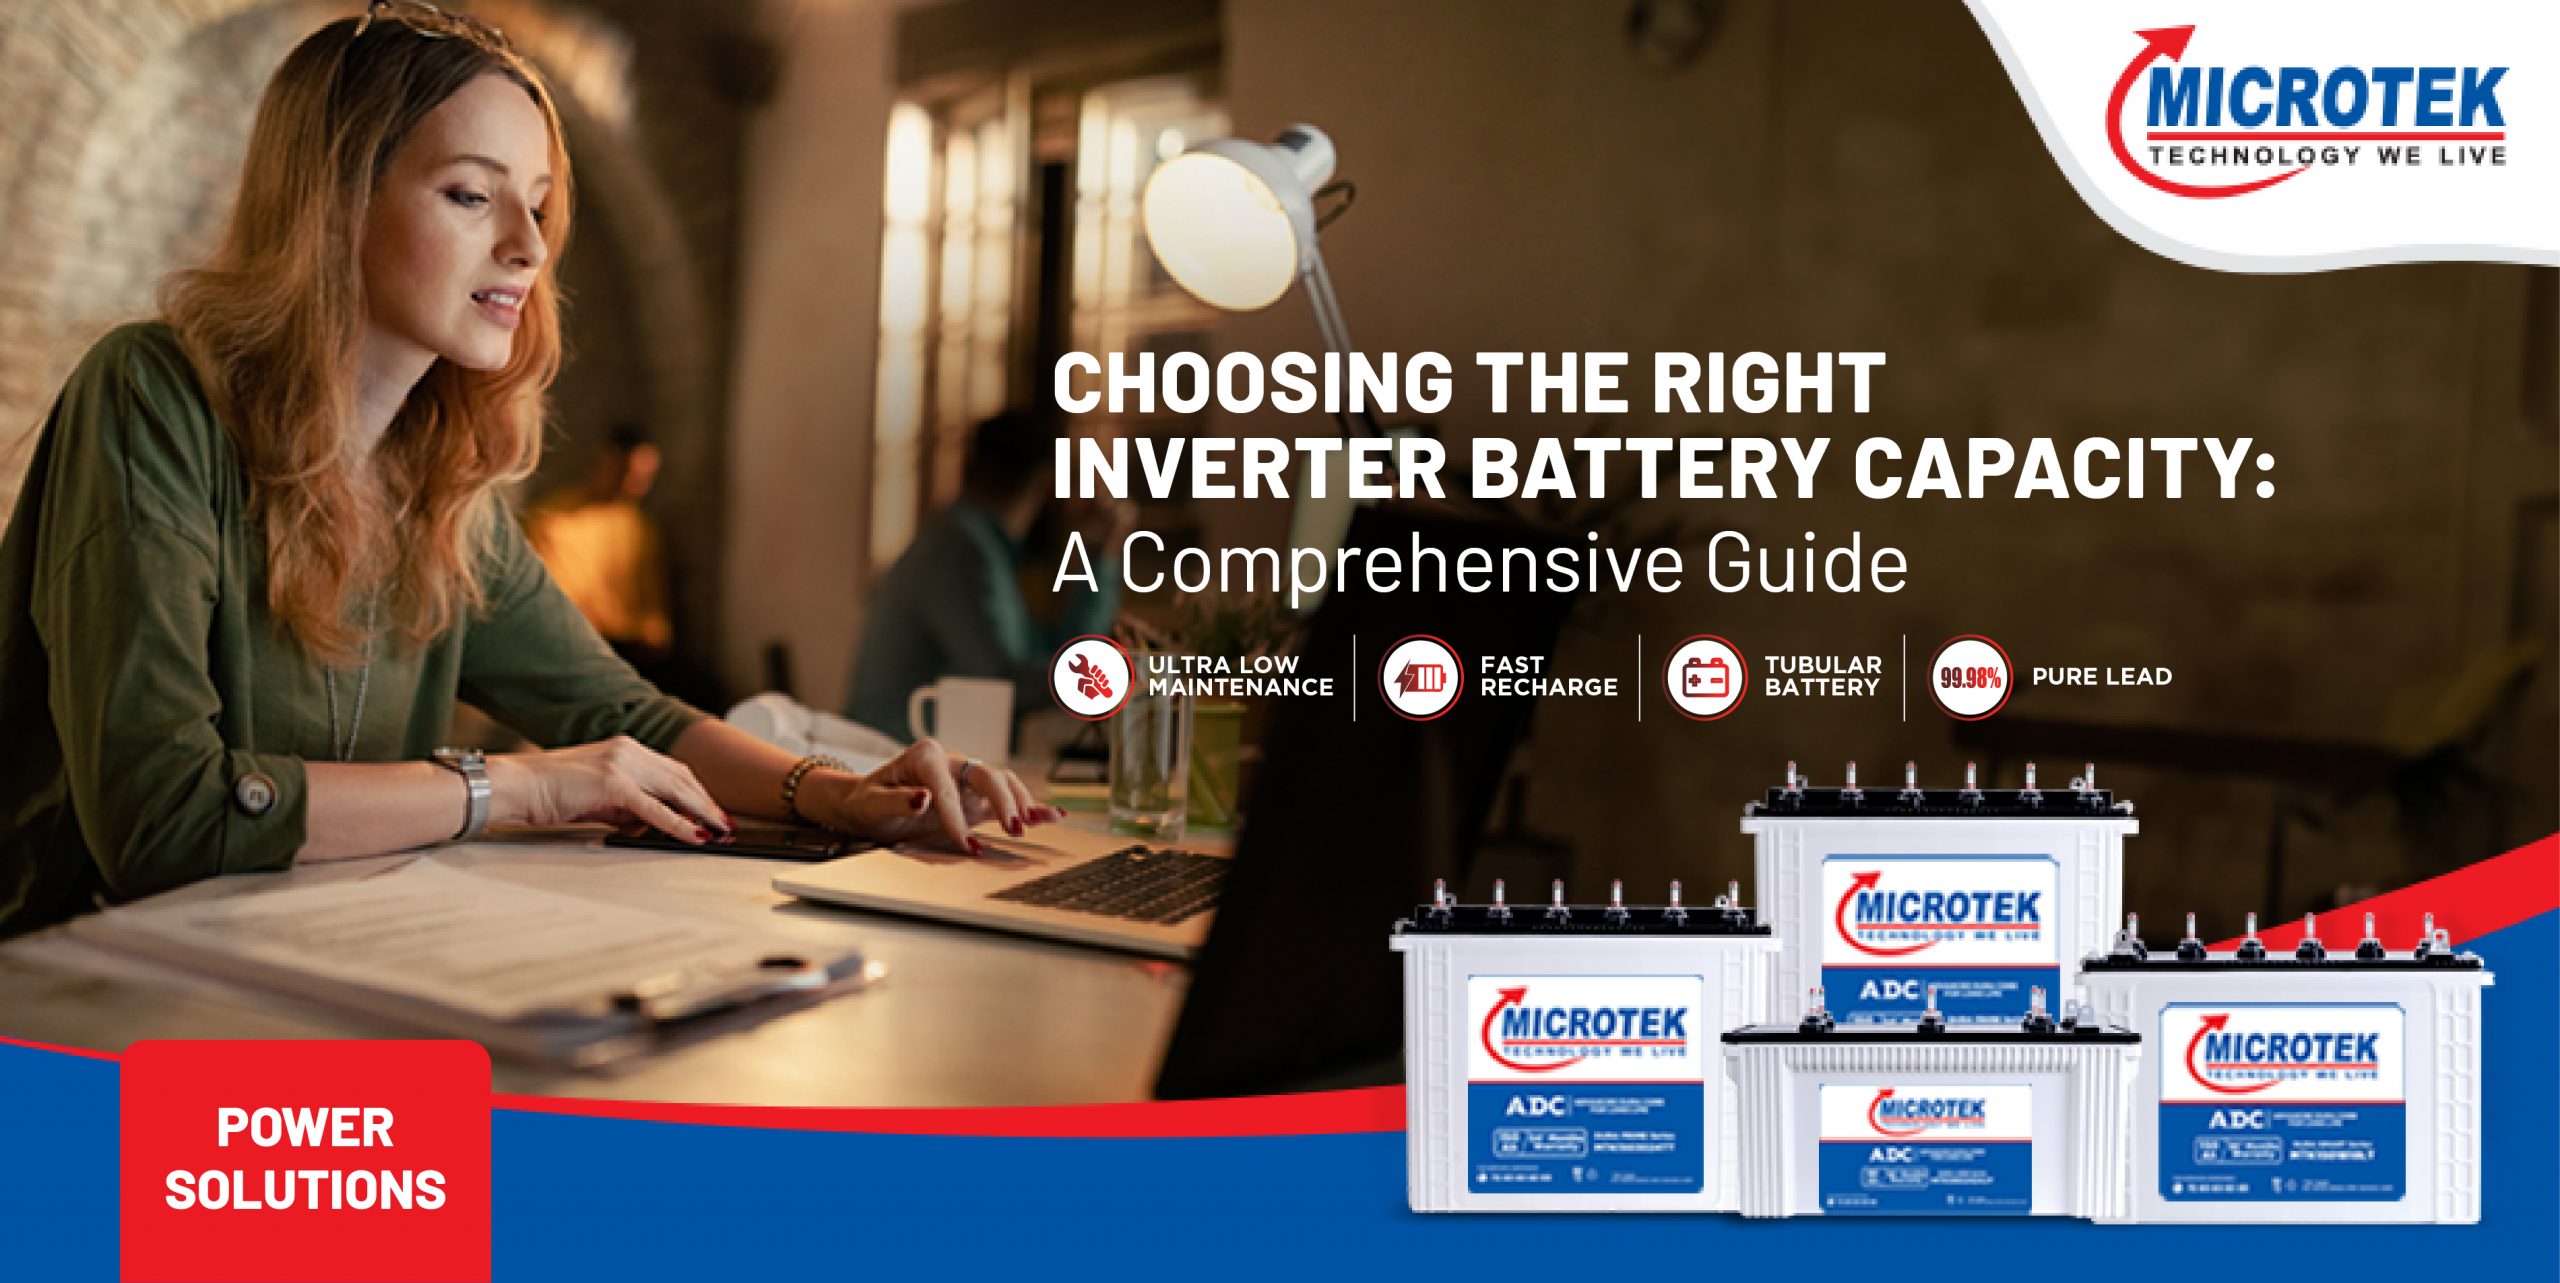 CHOOSING THE RIGHT INVERTER BATTERY CAPACITY: A COMPREHENSIVE GUIDE